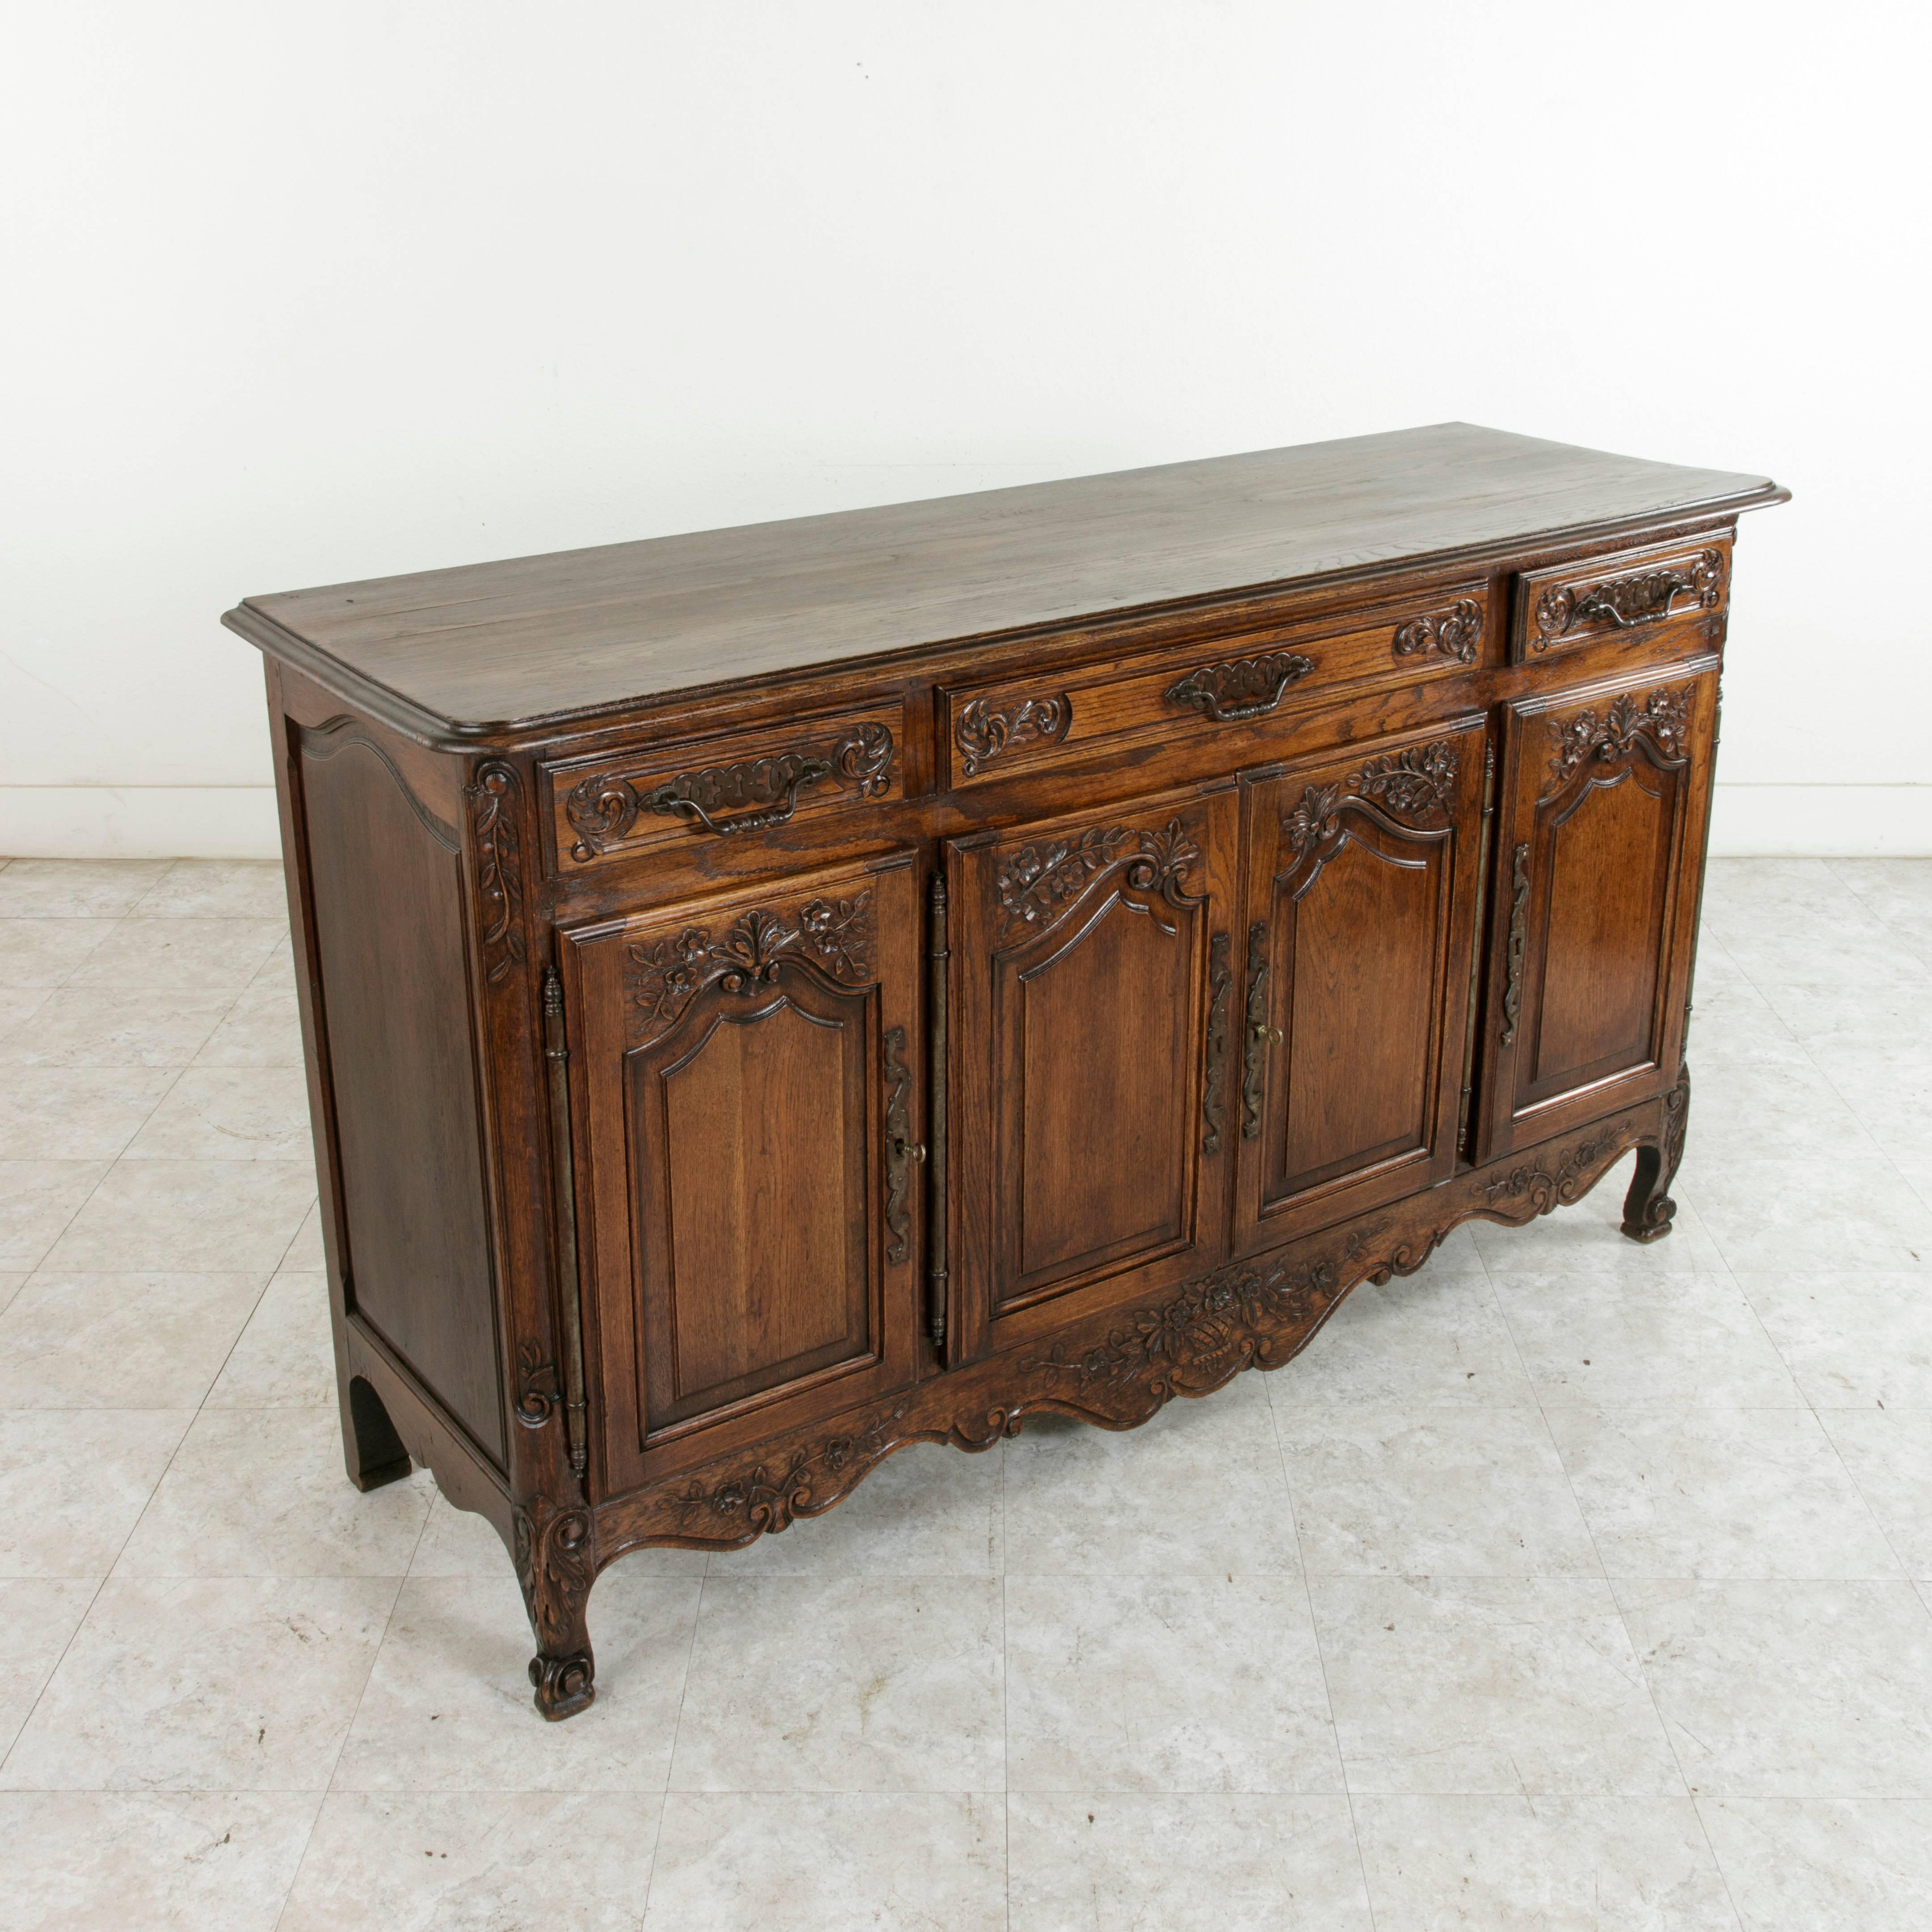 This early 20th century Louis XV style oak enfilade or sideboard from Normandy, France, features paneled sides and doors, and hand-carved motifs of scrolling, leaves, flowers, and shells. A carved basket, the symbol of bounty in the region of